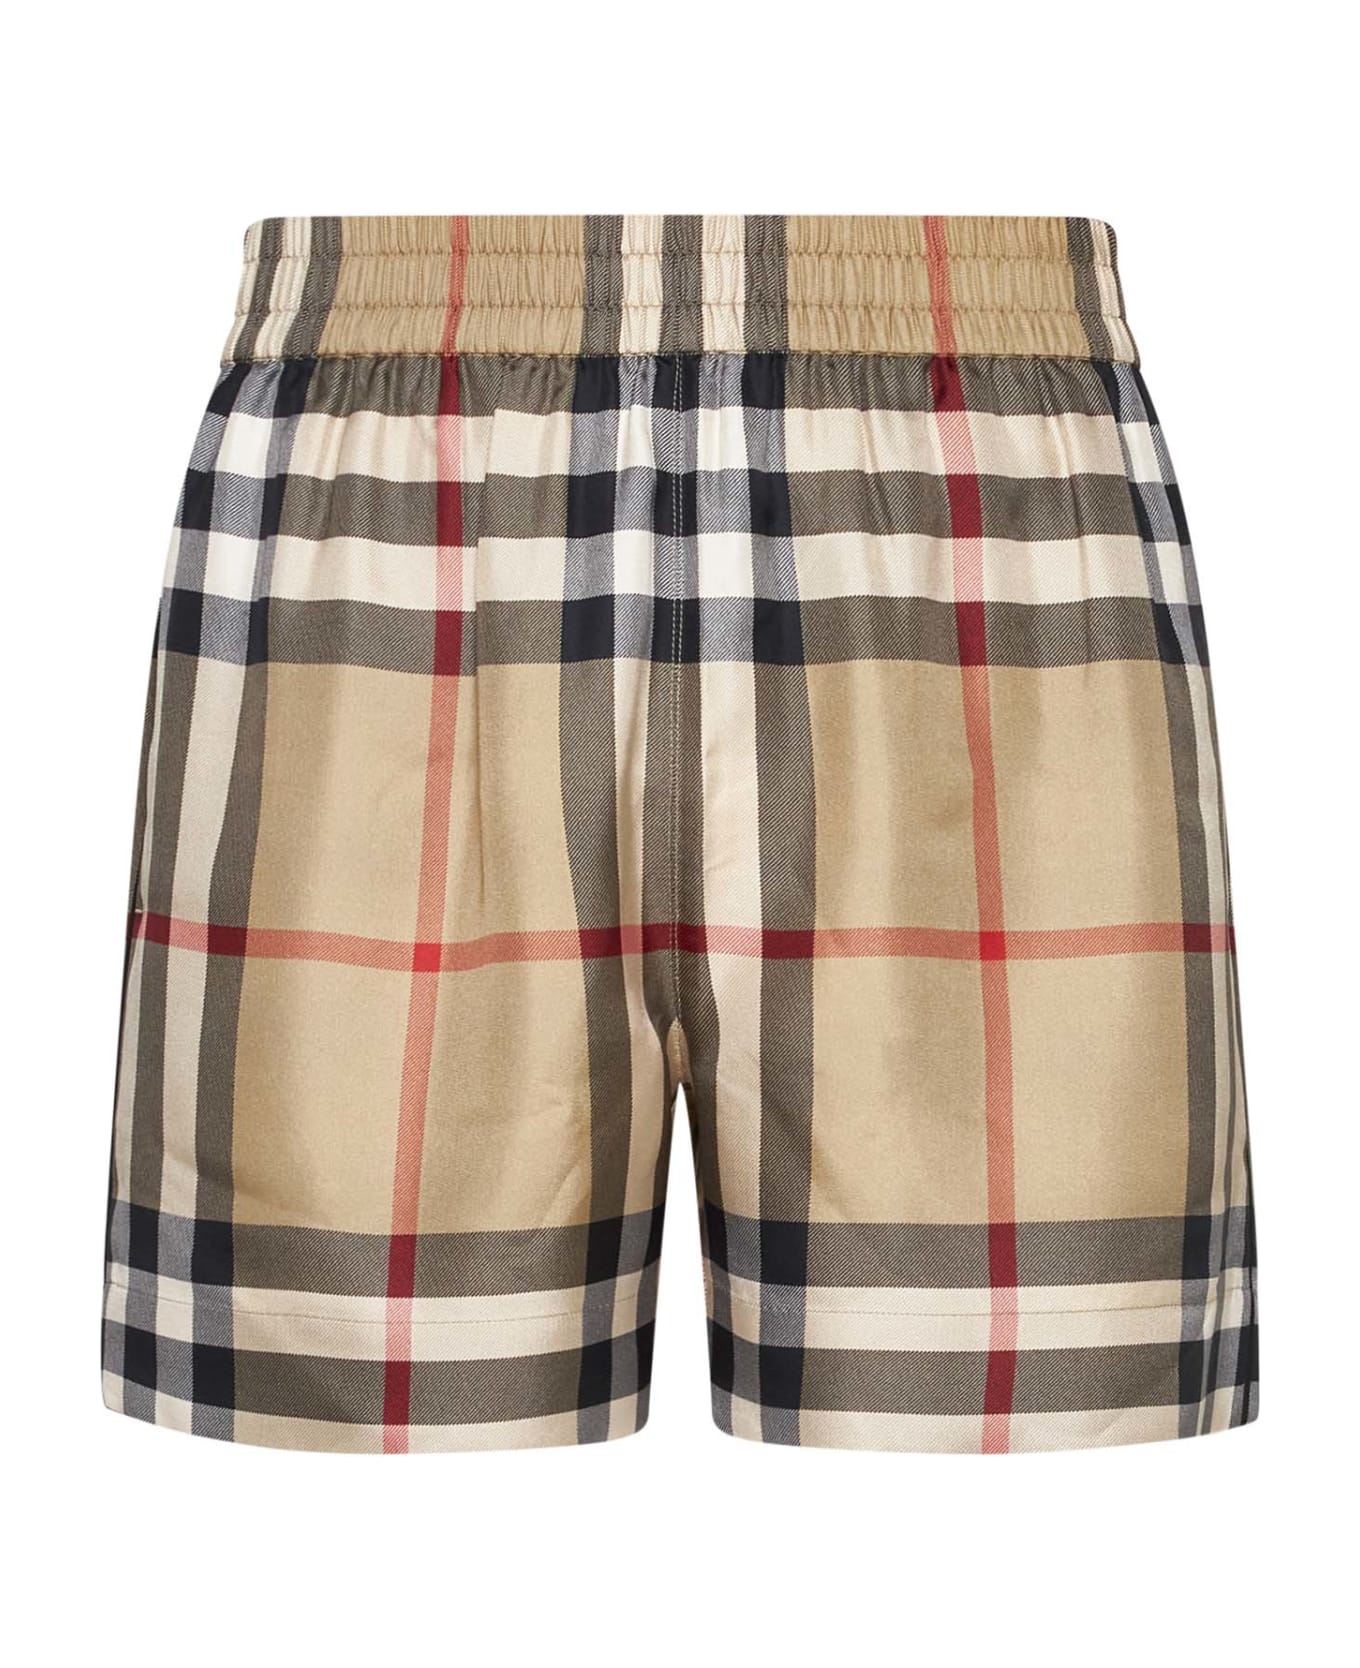 Burberry Multicolor Bermuda Shorts With Vintage Check Motif In Stretch Cotton Woman Burberry - Archive beige ip chk ショートパンツ